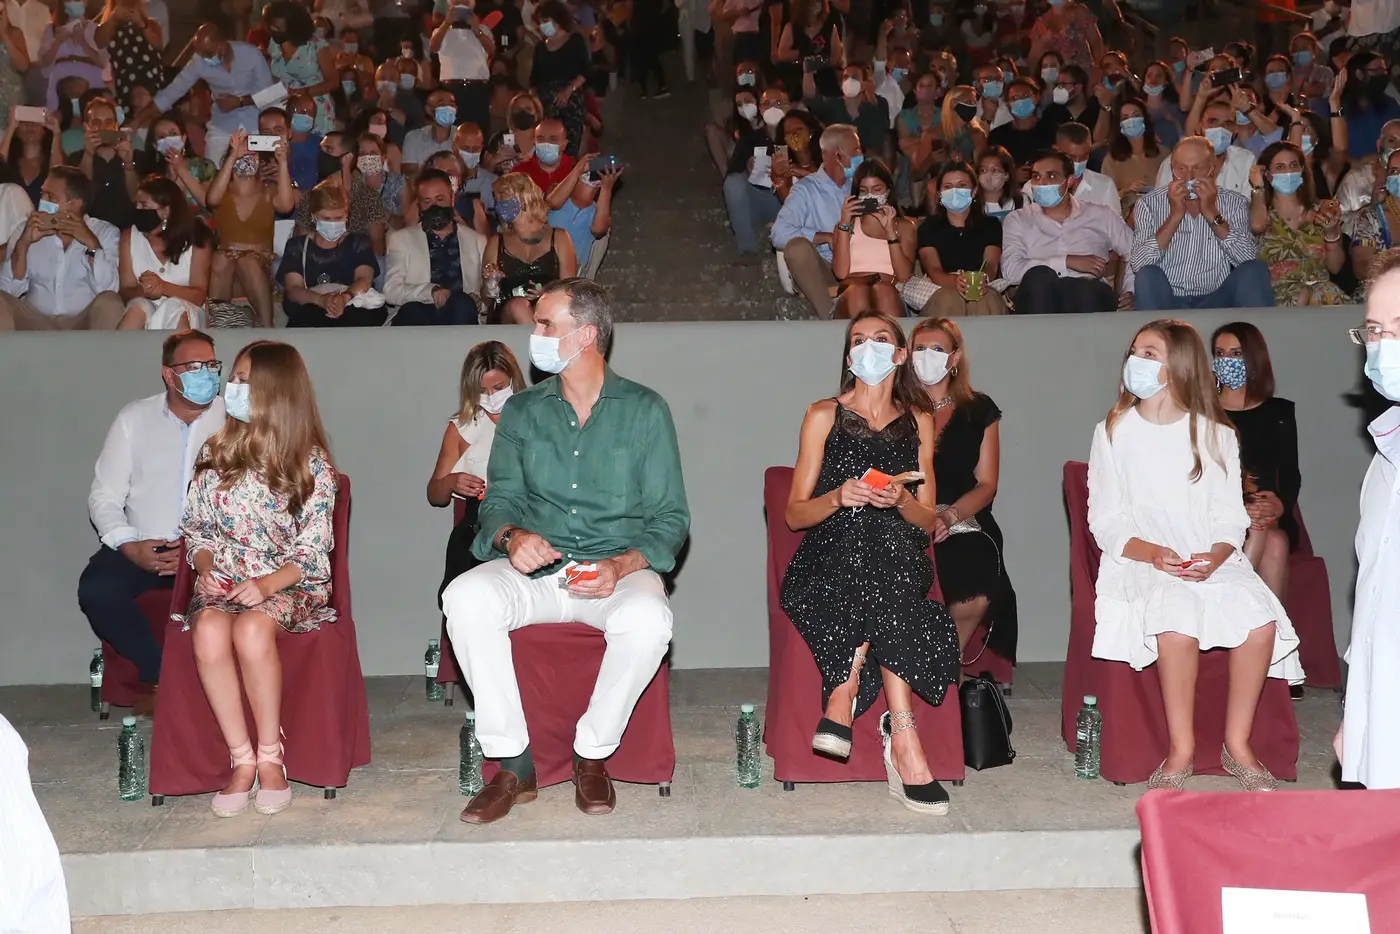 King Felipe and Queen Letizia with their daughters at a performance at the National Museum of Roman Art in Mérida